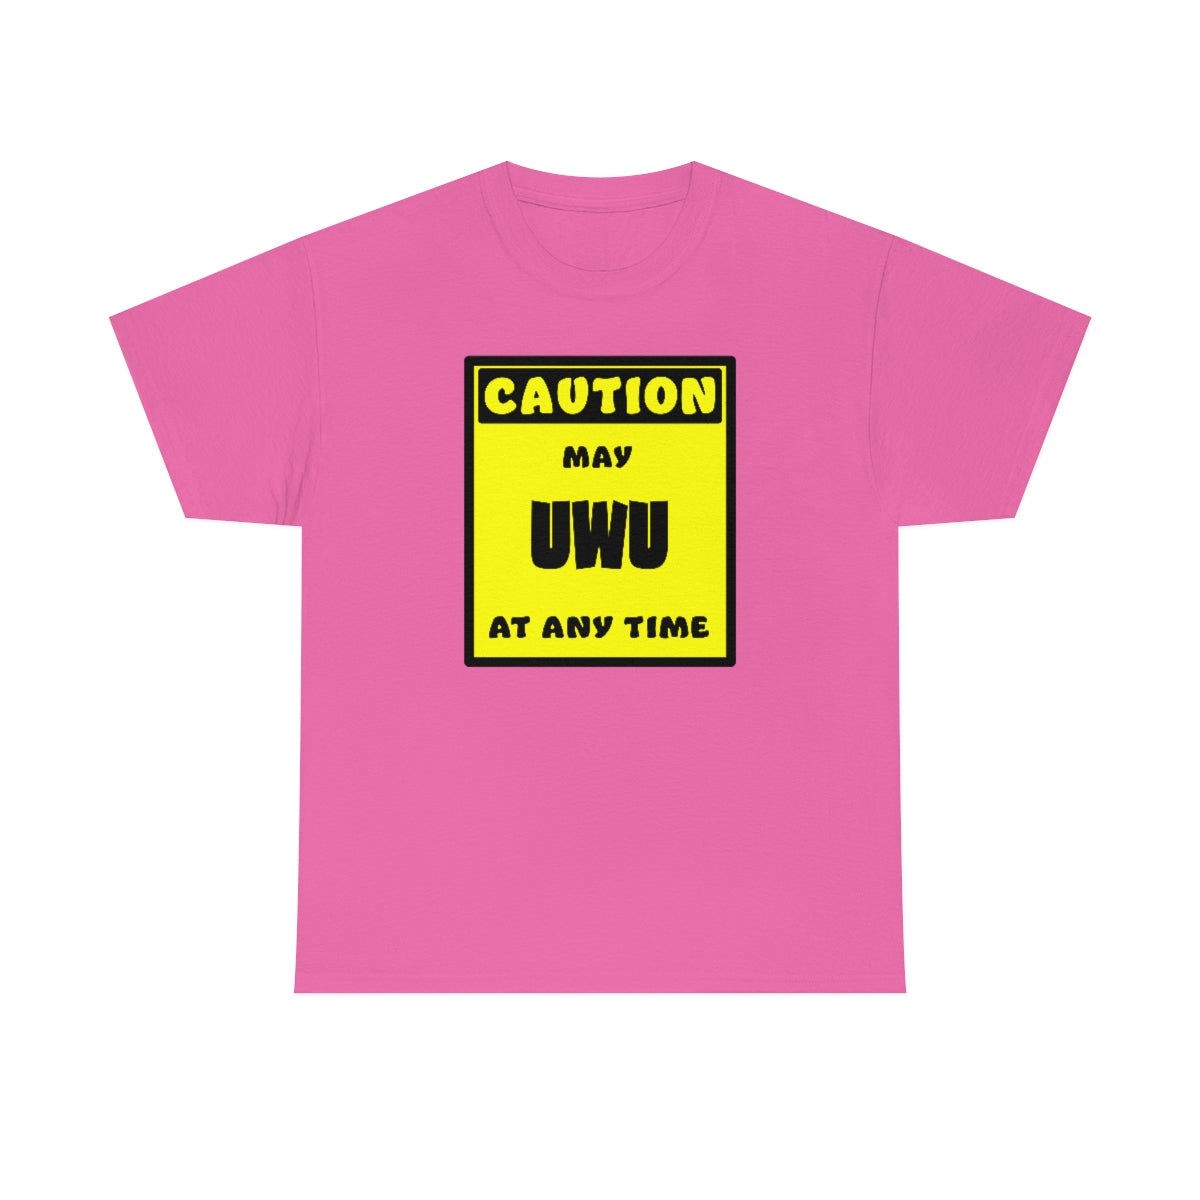 CAUTION! May UWU at any time! - T-Shirt T-Shirt AFLT-Whootorca Pink S 